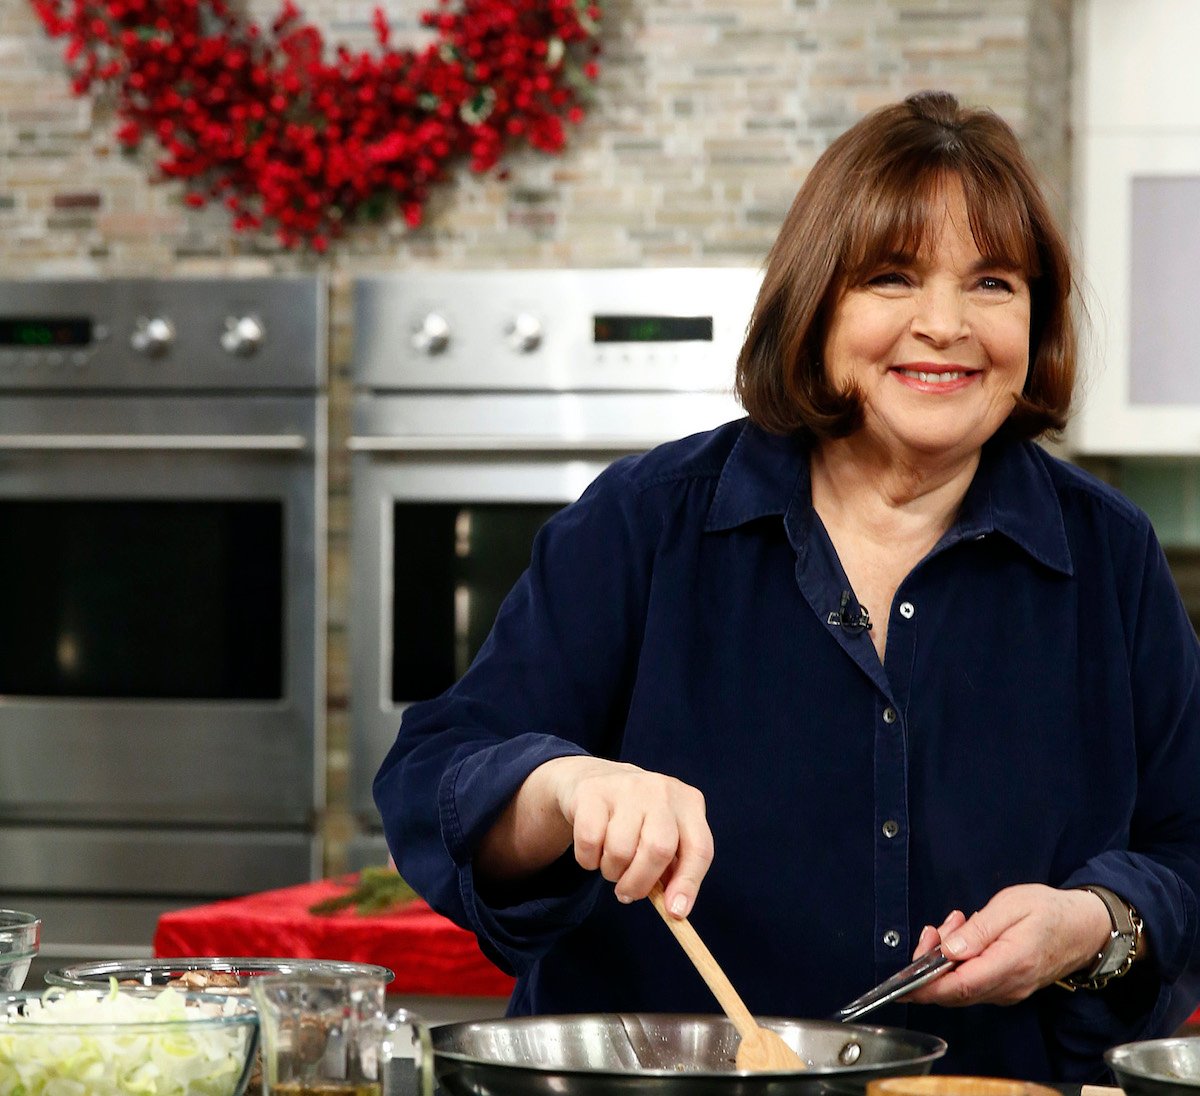 Ina Garten smiles as she stirs food with a wooden spoon on the Today show